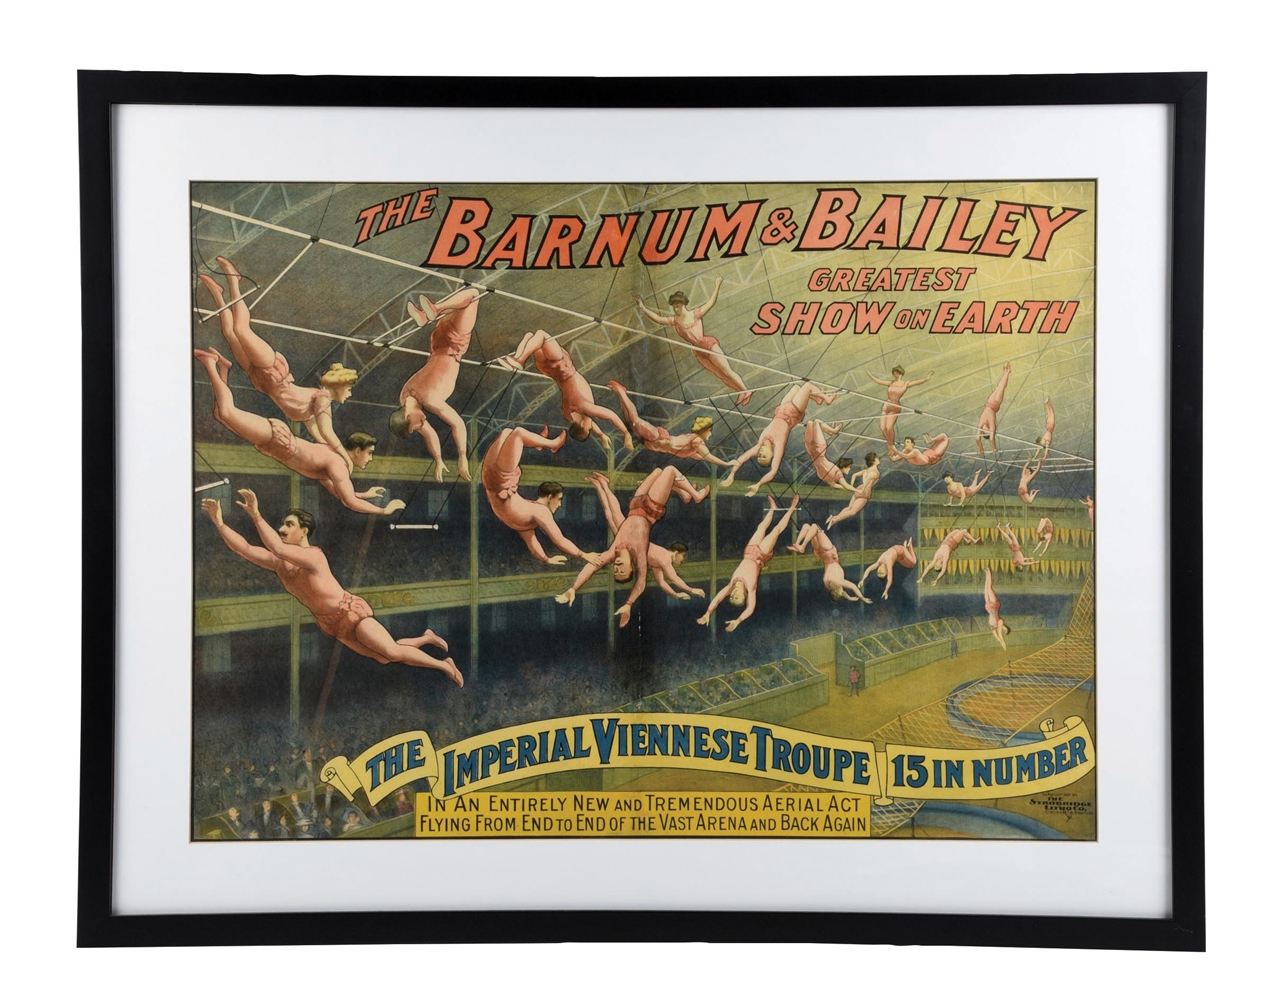 THE BARNUM & BAILEY "GREATEST SHOW ON EARTH" PAPER LITHOGRAPH POSTER W/ TRAPEZE GRAPHICS